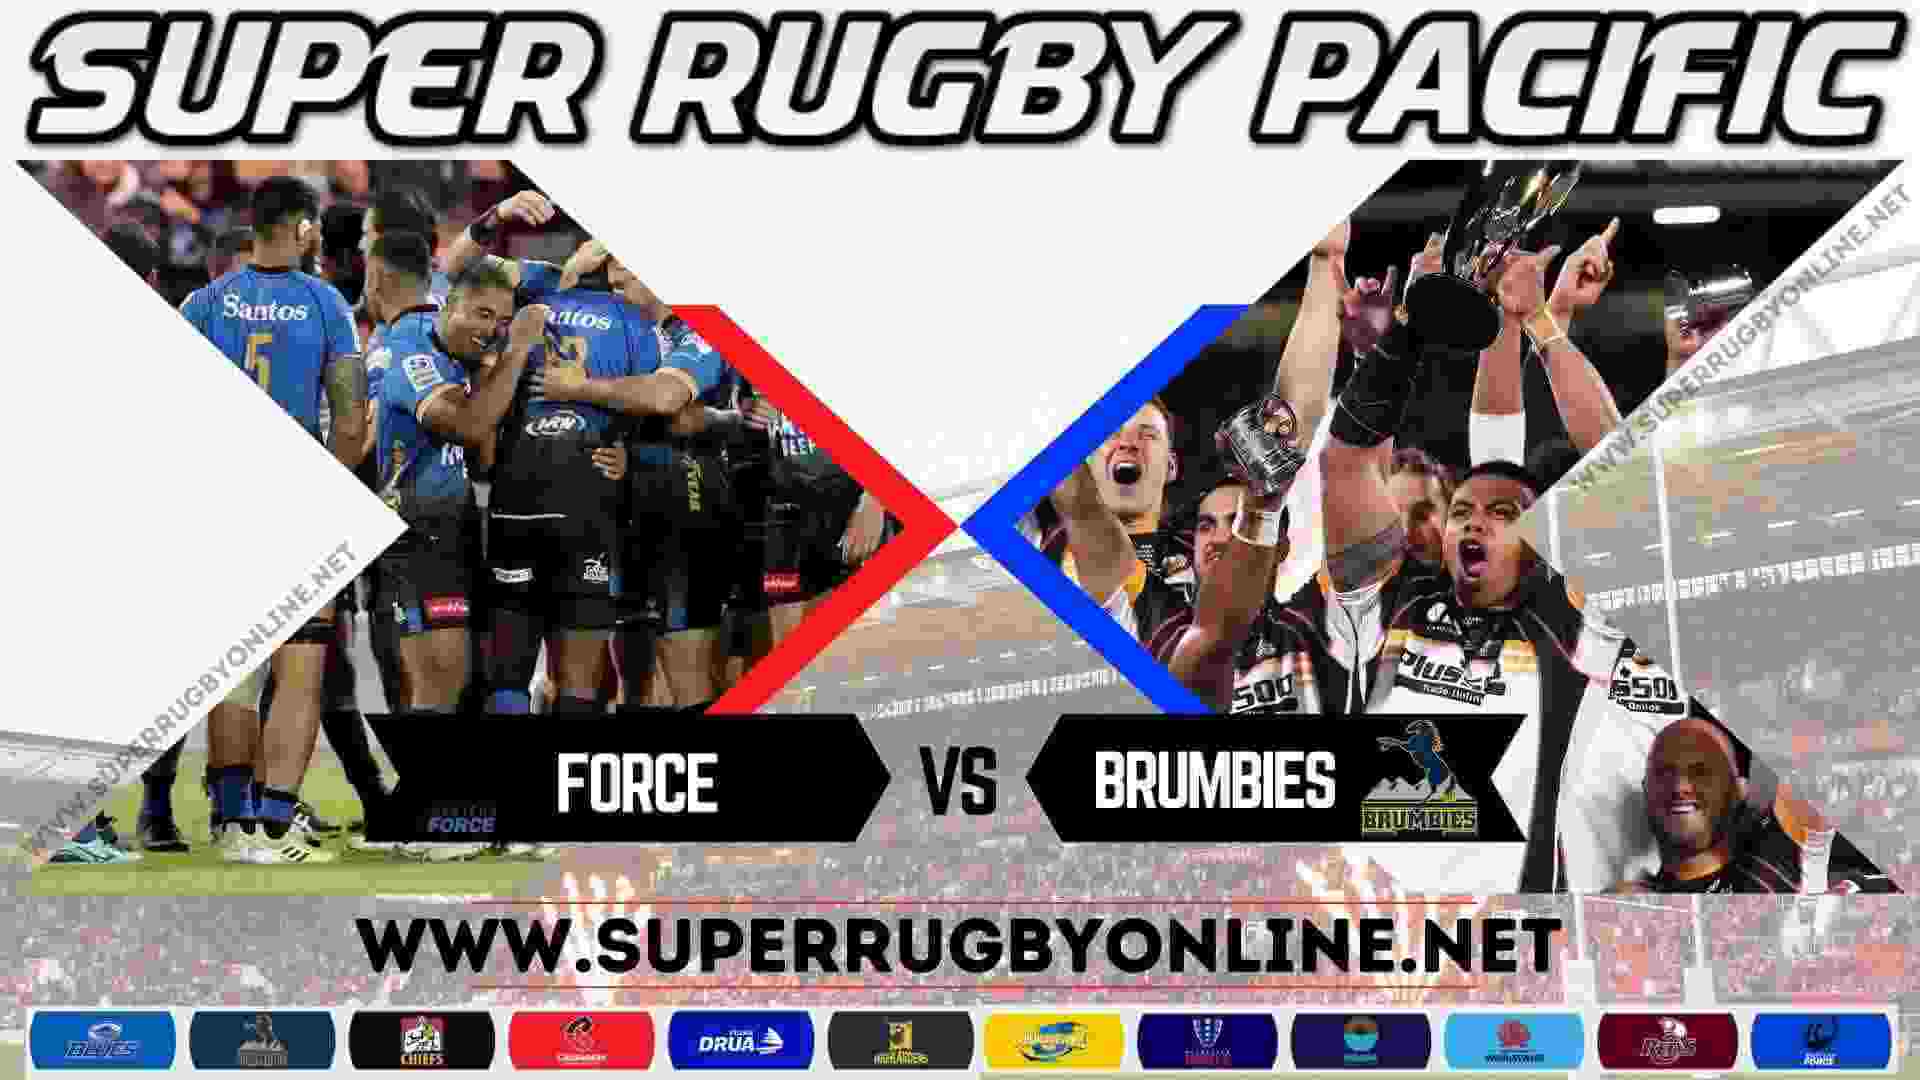 brumbies-vs-force-rugby-live-stream